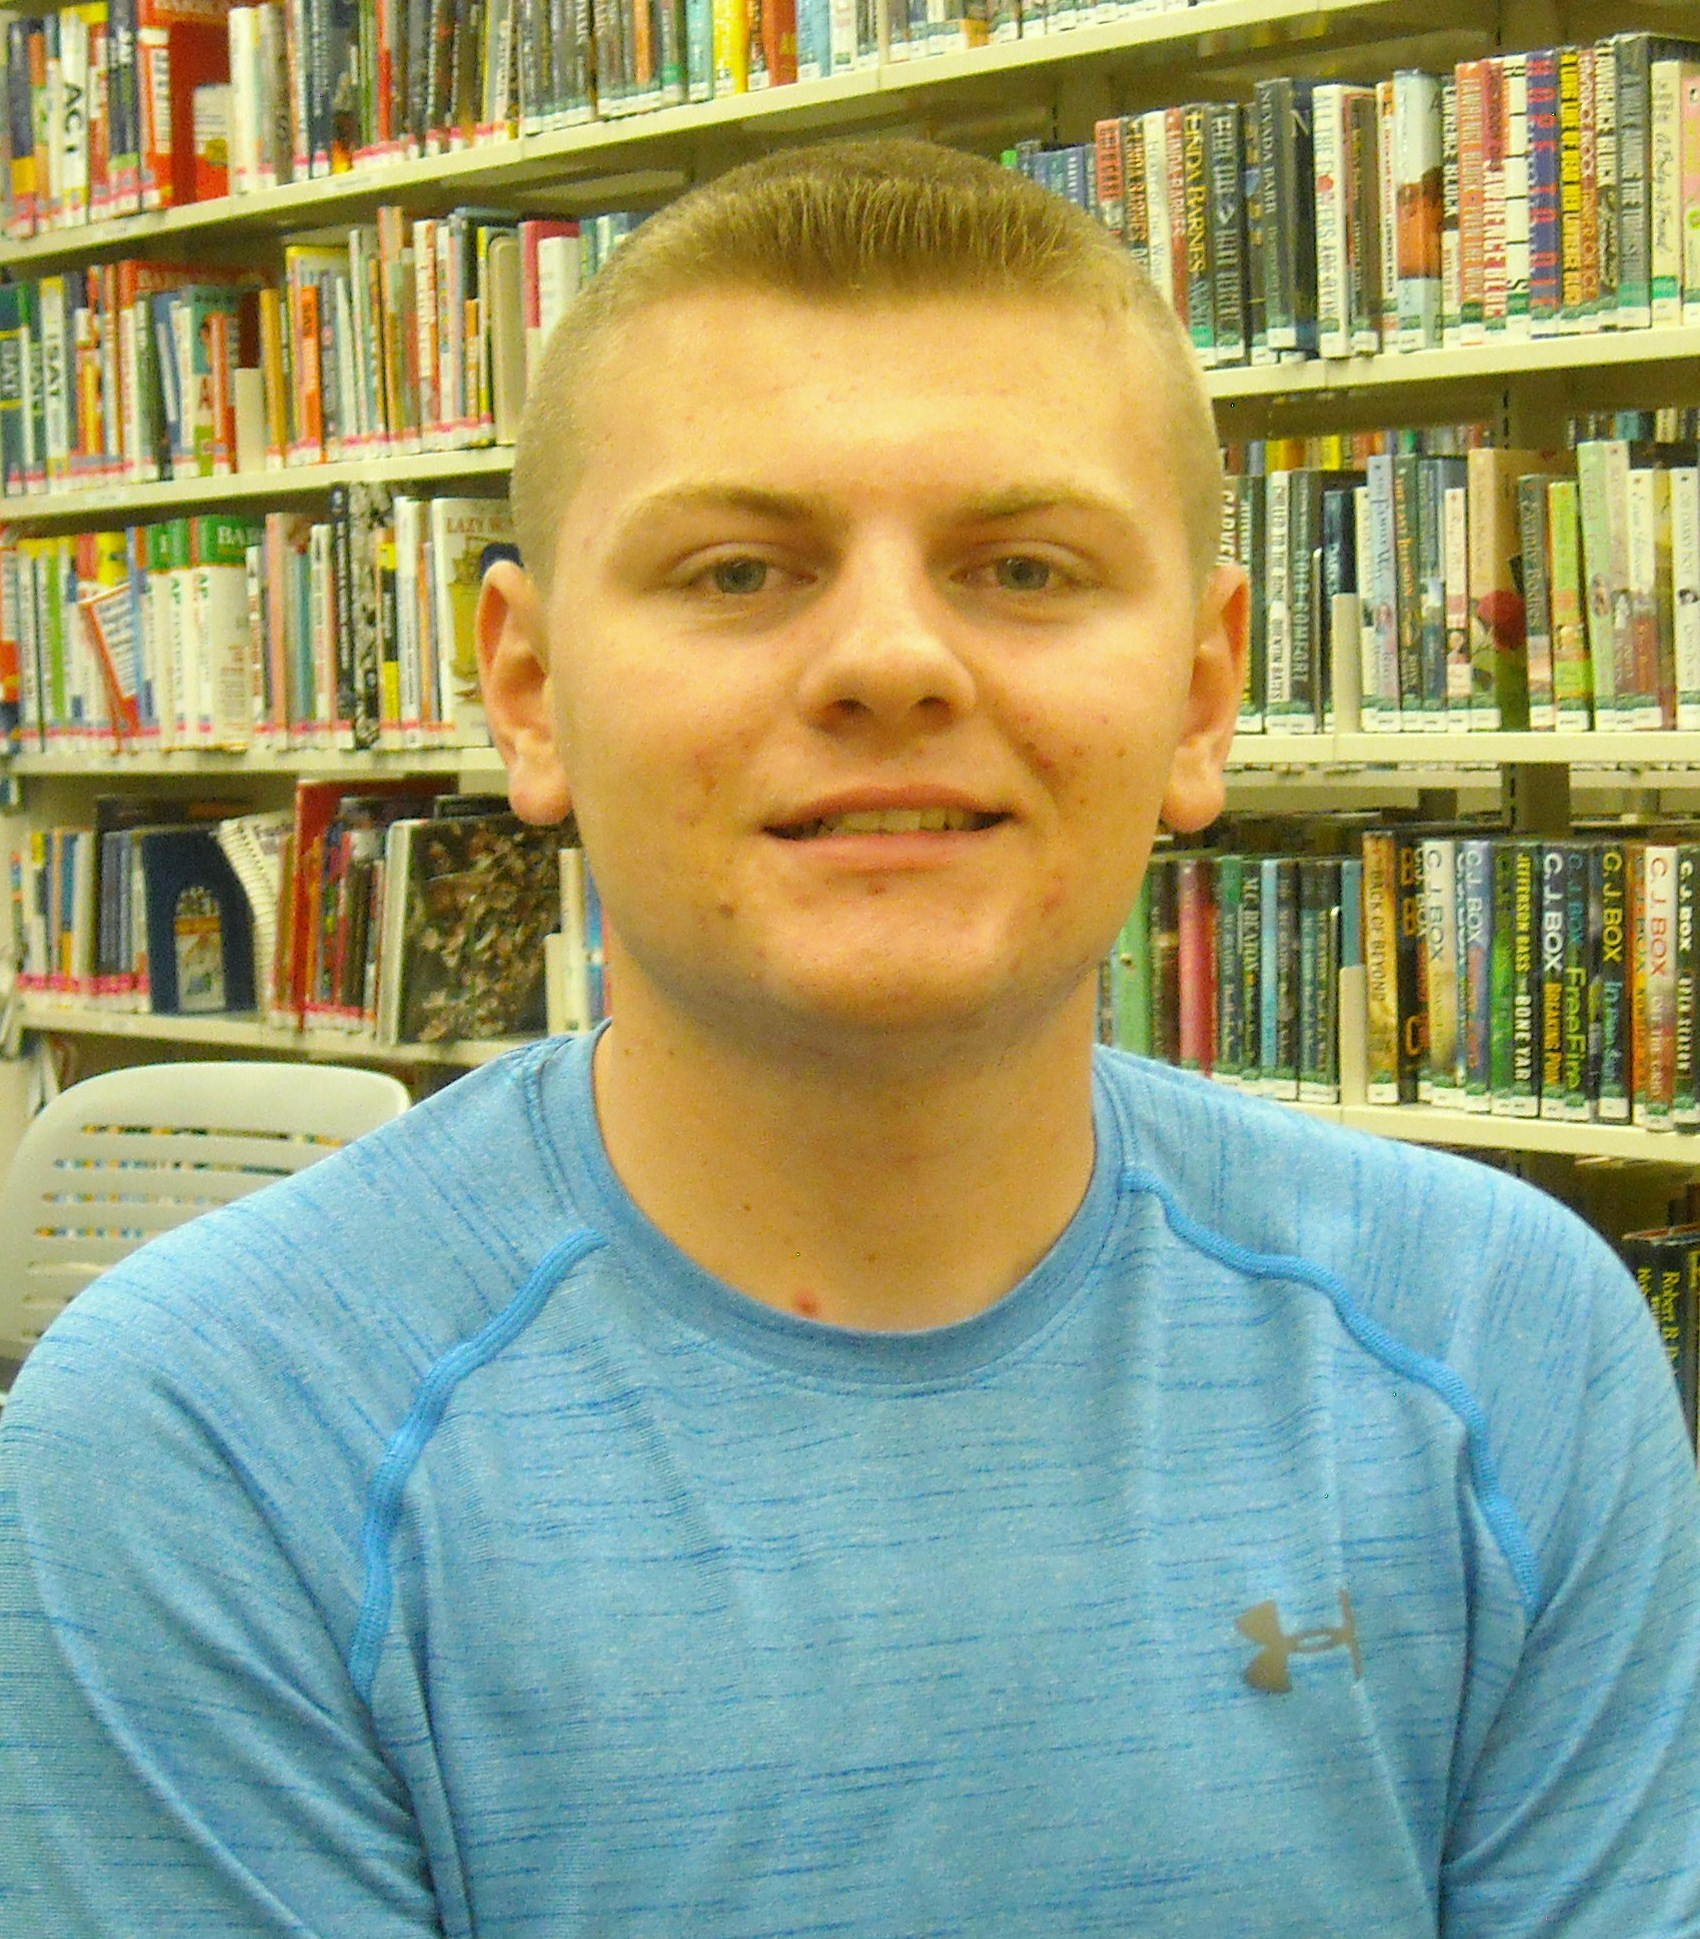 VOLUNTEER OF THE WEEK: Kyle O’Grady, President of the North Rockland HS Interact Club